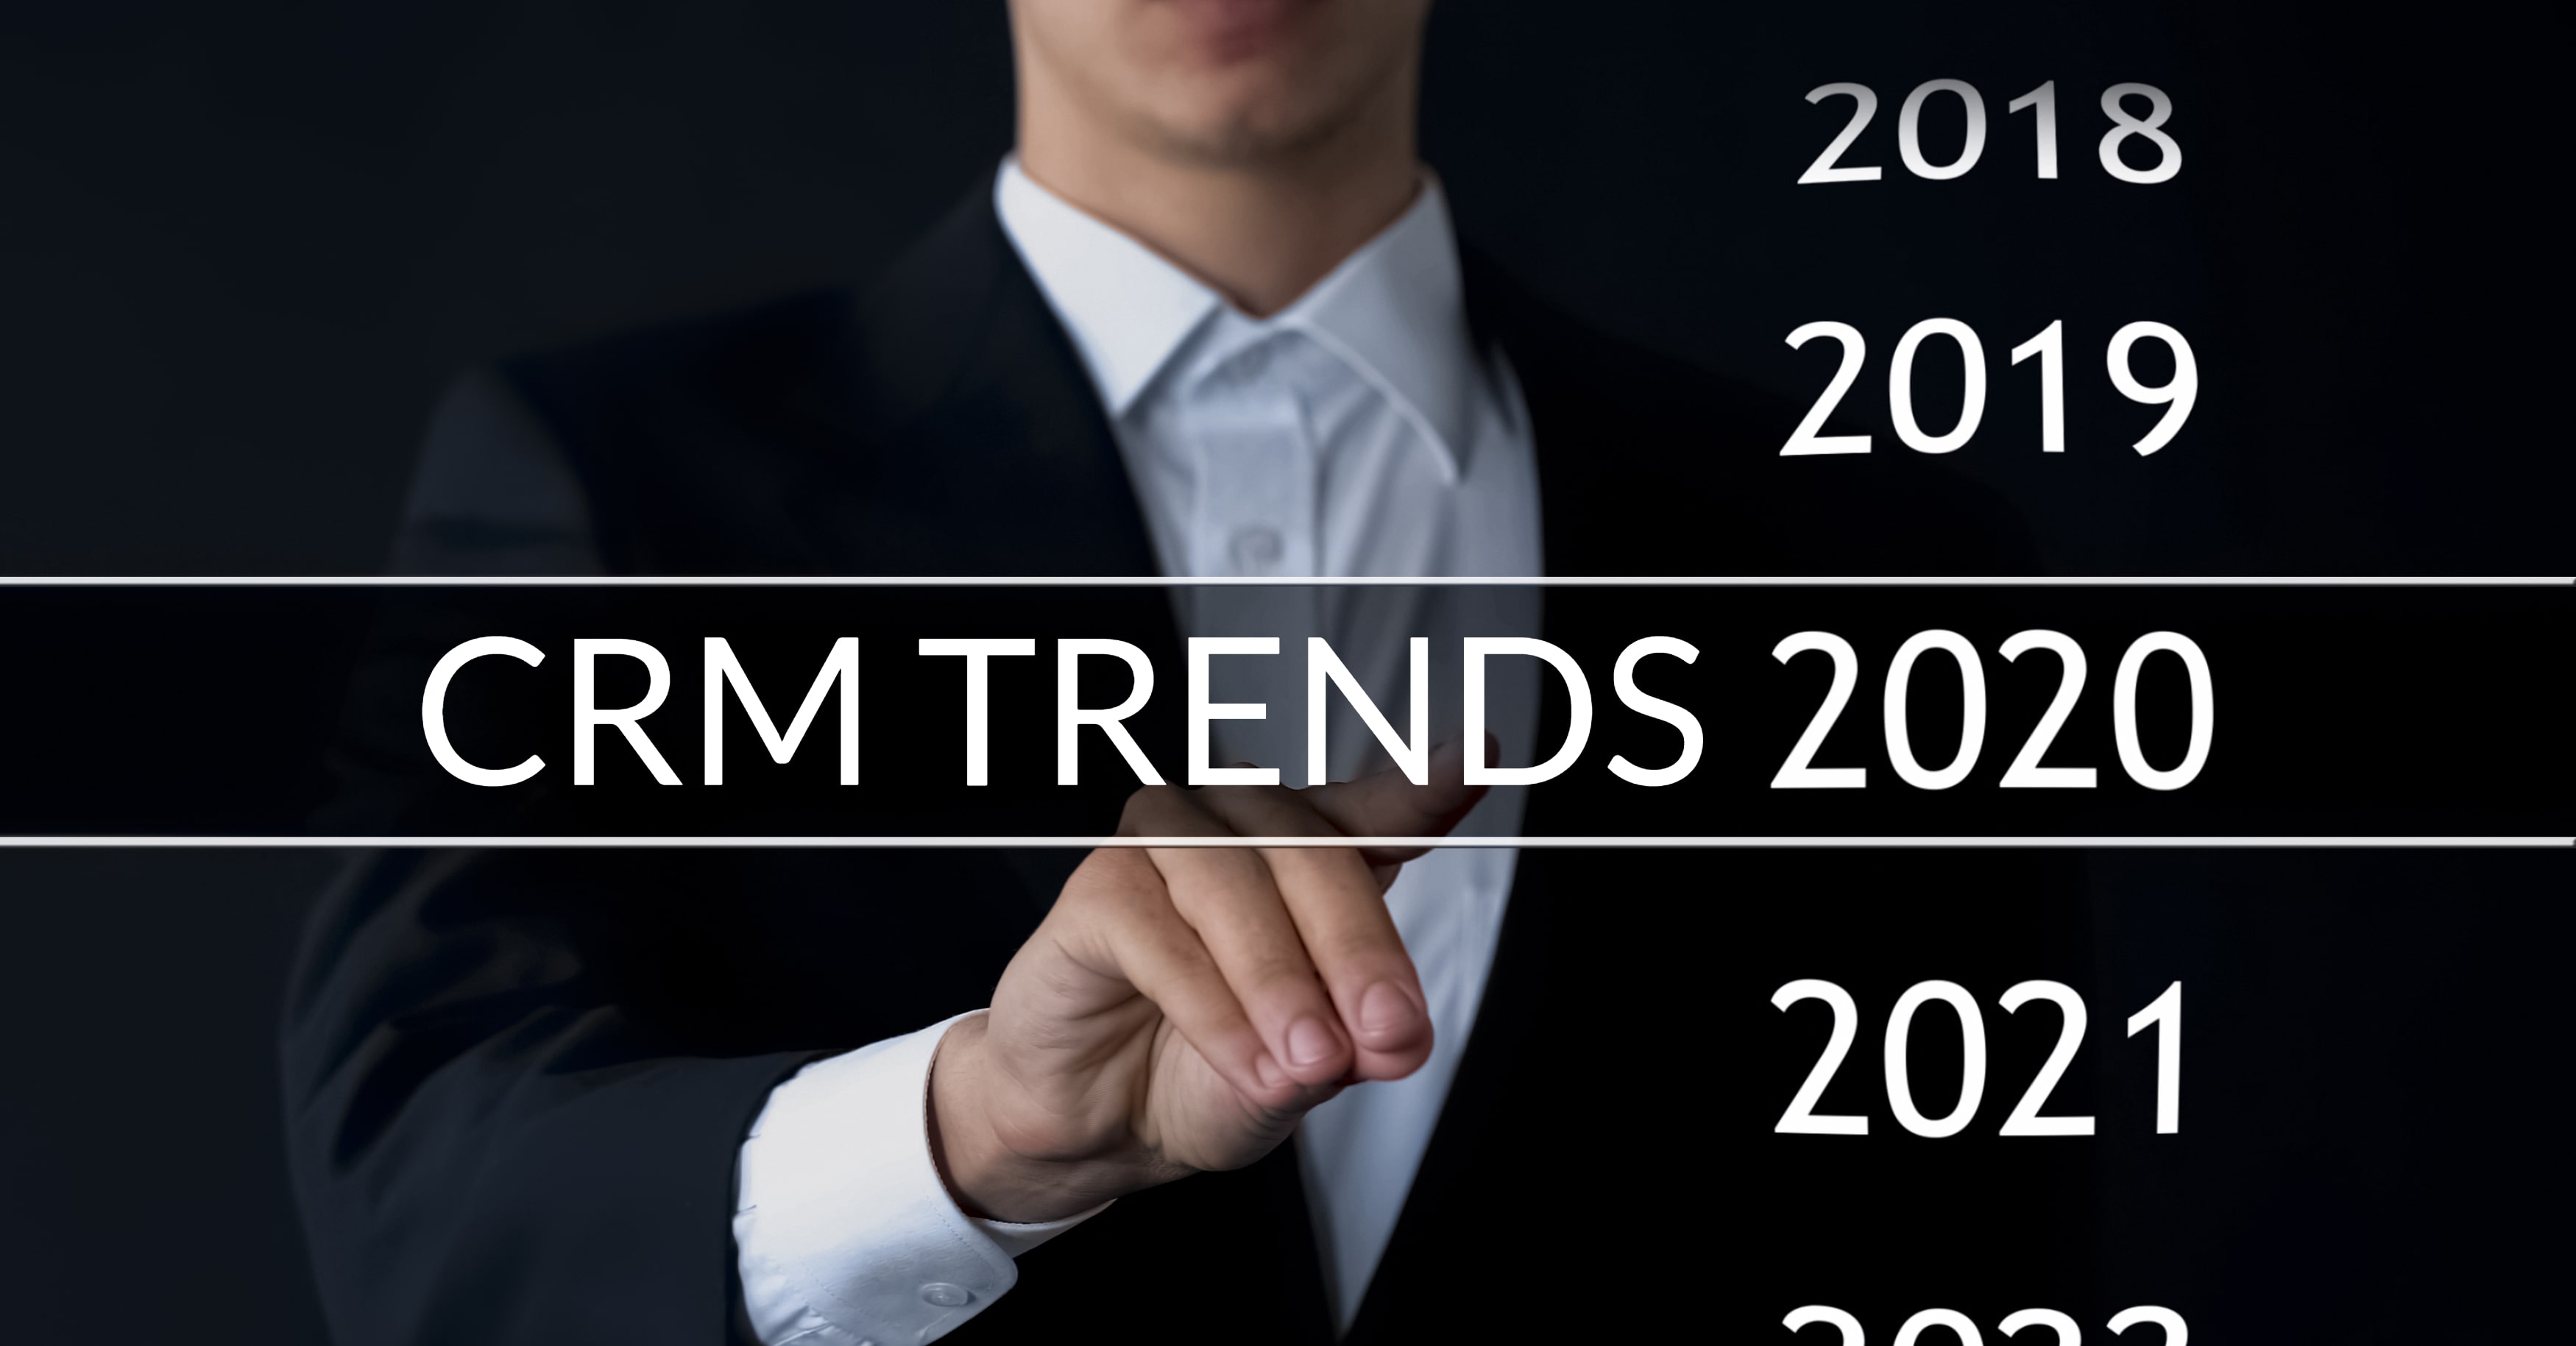 CRM Trends 2020